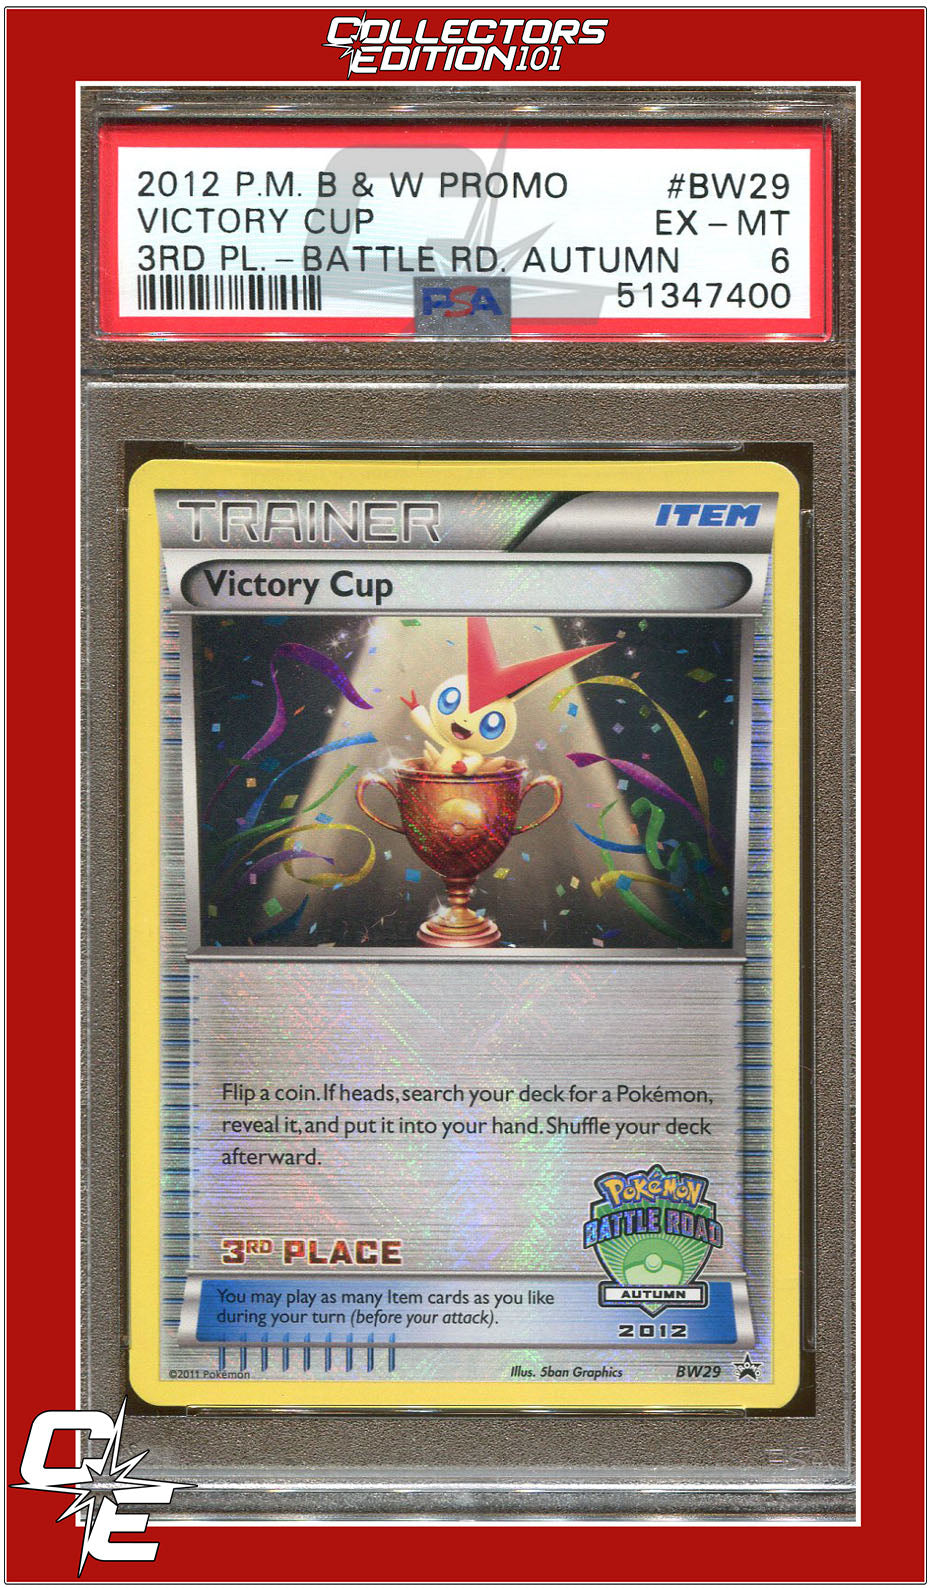 BW Black Star Promo BW29 Victory Cup 3rd Place 2012 Battle Road Autumn PSA 6